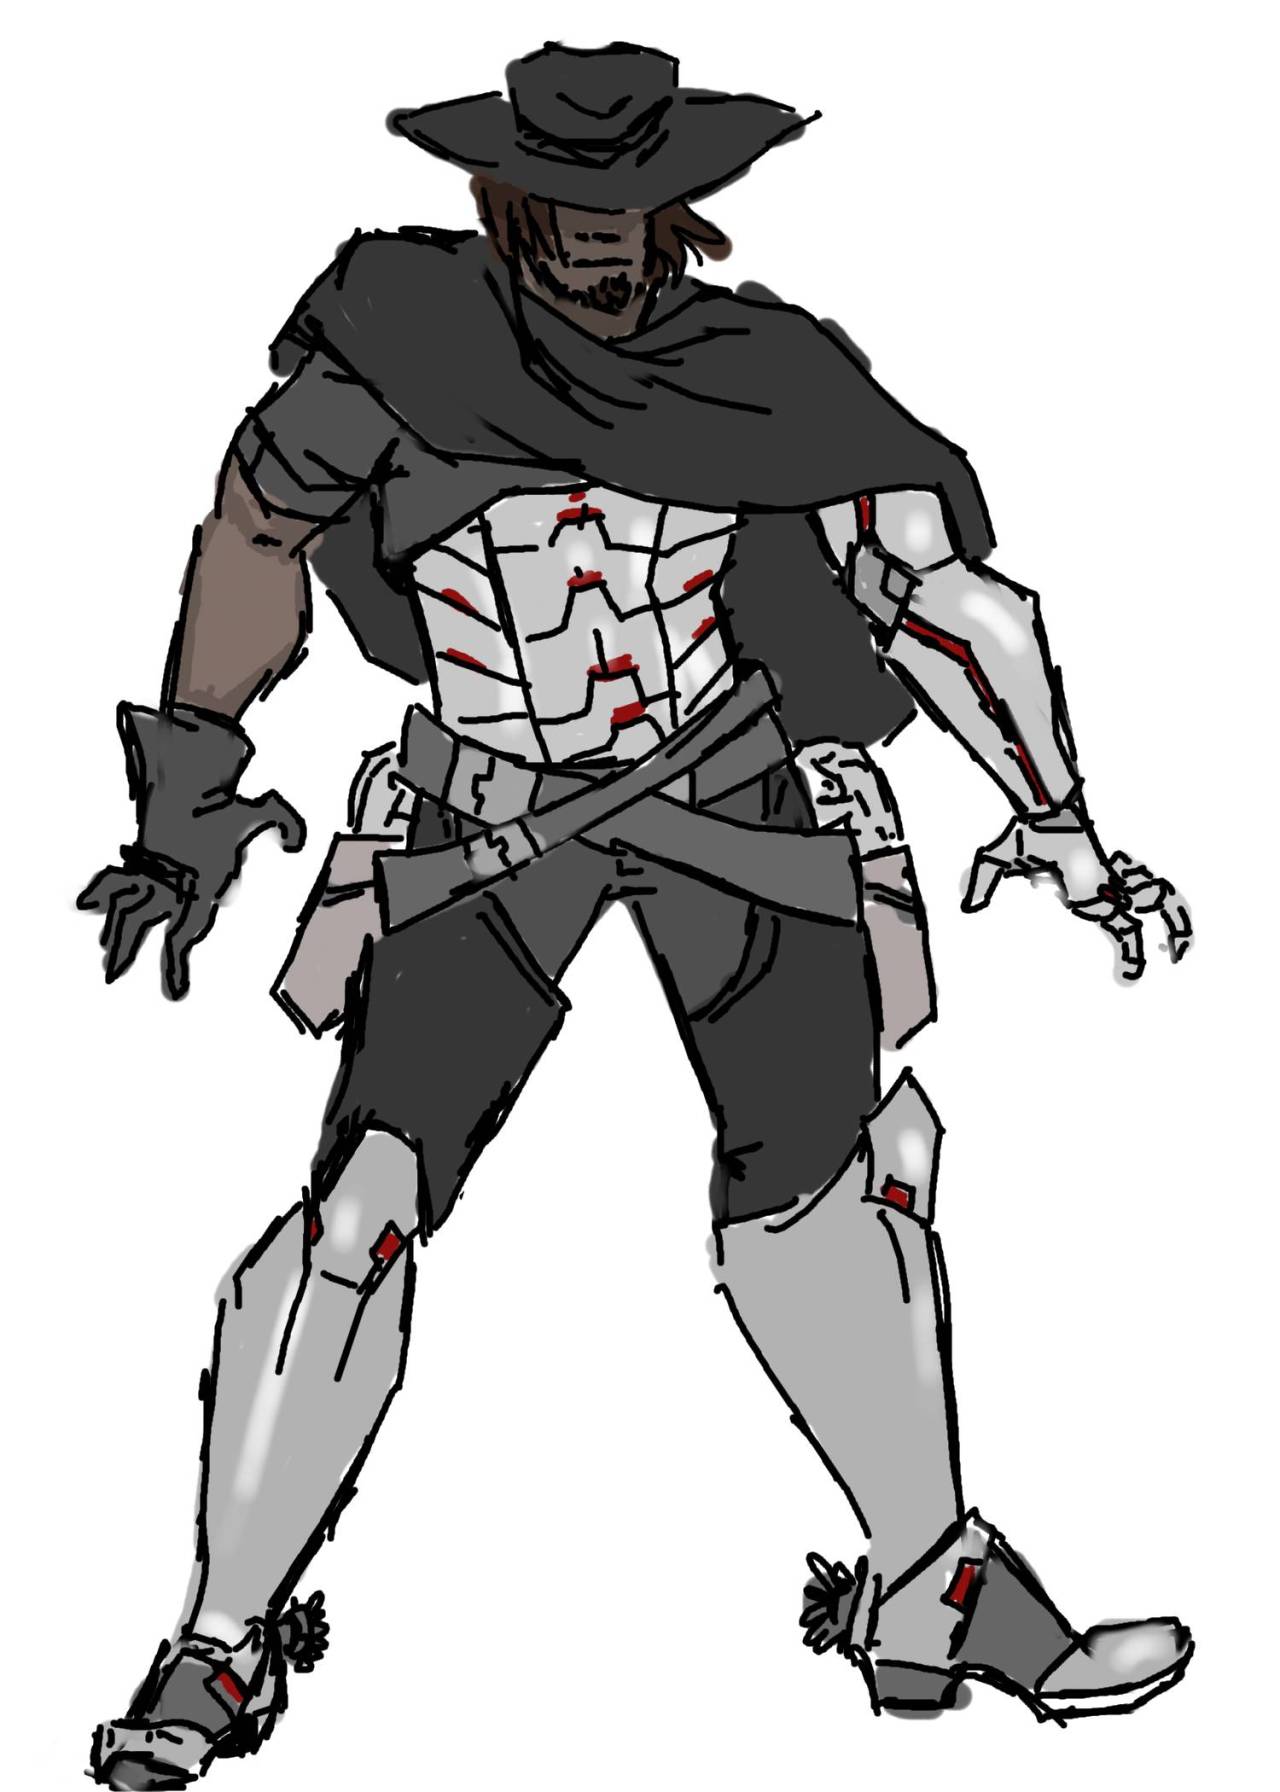 Blackwatch Genji and Cole/Jesse from a Reverse AU I’ve been toying with.  Gabe ends up acquiring Genji first, interfering with his and Hanzo’s duel so that Genji only ends up losing an arm.  Blackwatch gets interested in Deadlock when they take a Talon contract. In the raid, Ashe blows up a train car as a bid to stall the Blackwatch agents. Unfortunately, Cole happens to still be in it.  Design notes: borrowed heavily from Gabriel’s Blackwatch skin for these two. I wanted to make their close relationship more visually clear. I chose to deliberately break up Cole’s colors more than in his canon design as a way to indicate the way his body’s broken, too. And threw in the Winter Soldier “one silver arm” on Genji because I think it’s cool. #art#overwatch fanart#overwatch#genji shimada#cole cassidy#Blackwatch boys#jesse mccree#reverse au